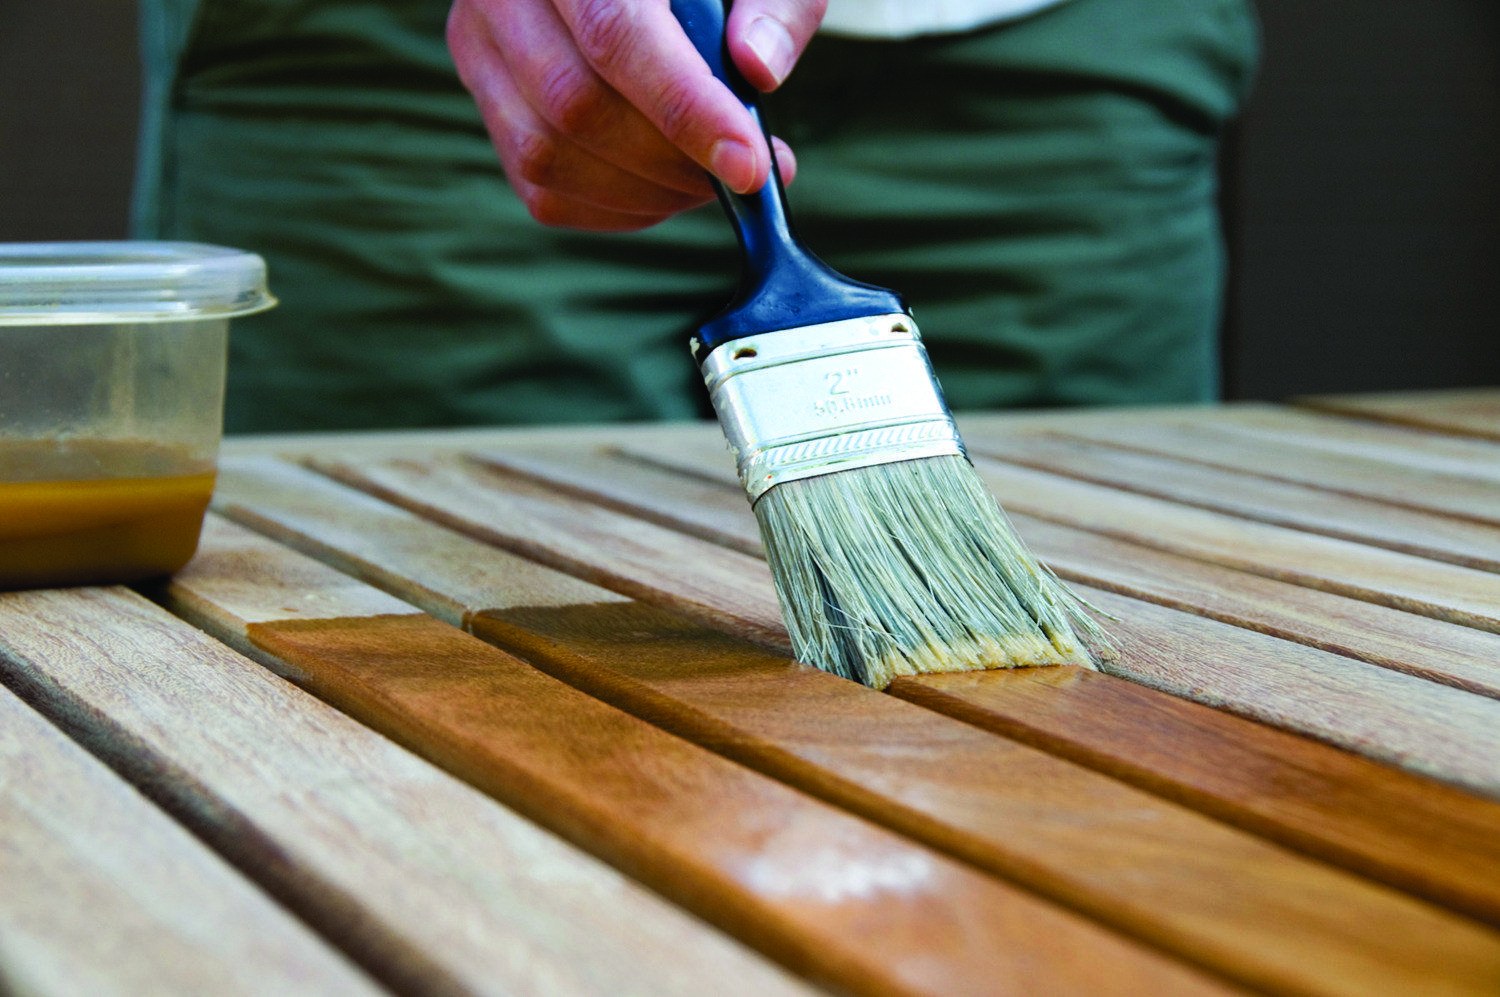 Wood Paints & Coatings Market: Growing Demand for Wood Protection Drives Market Growth